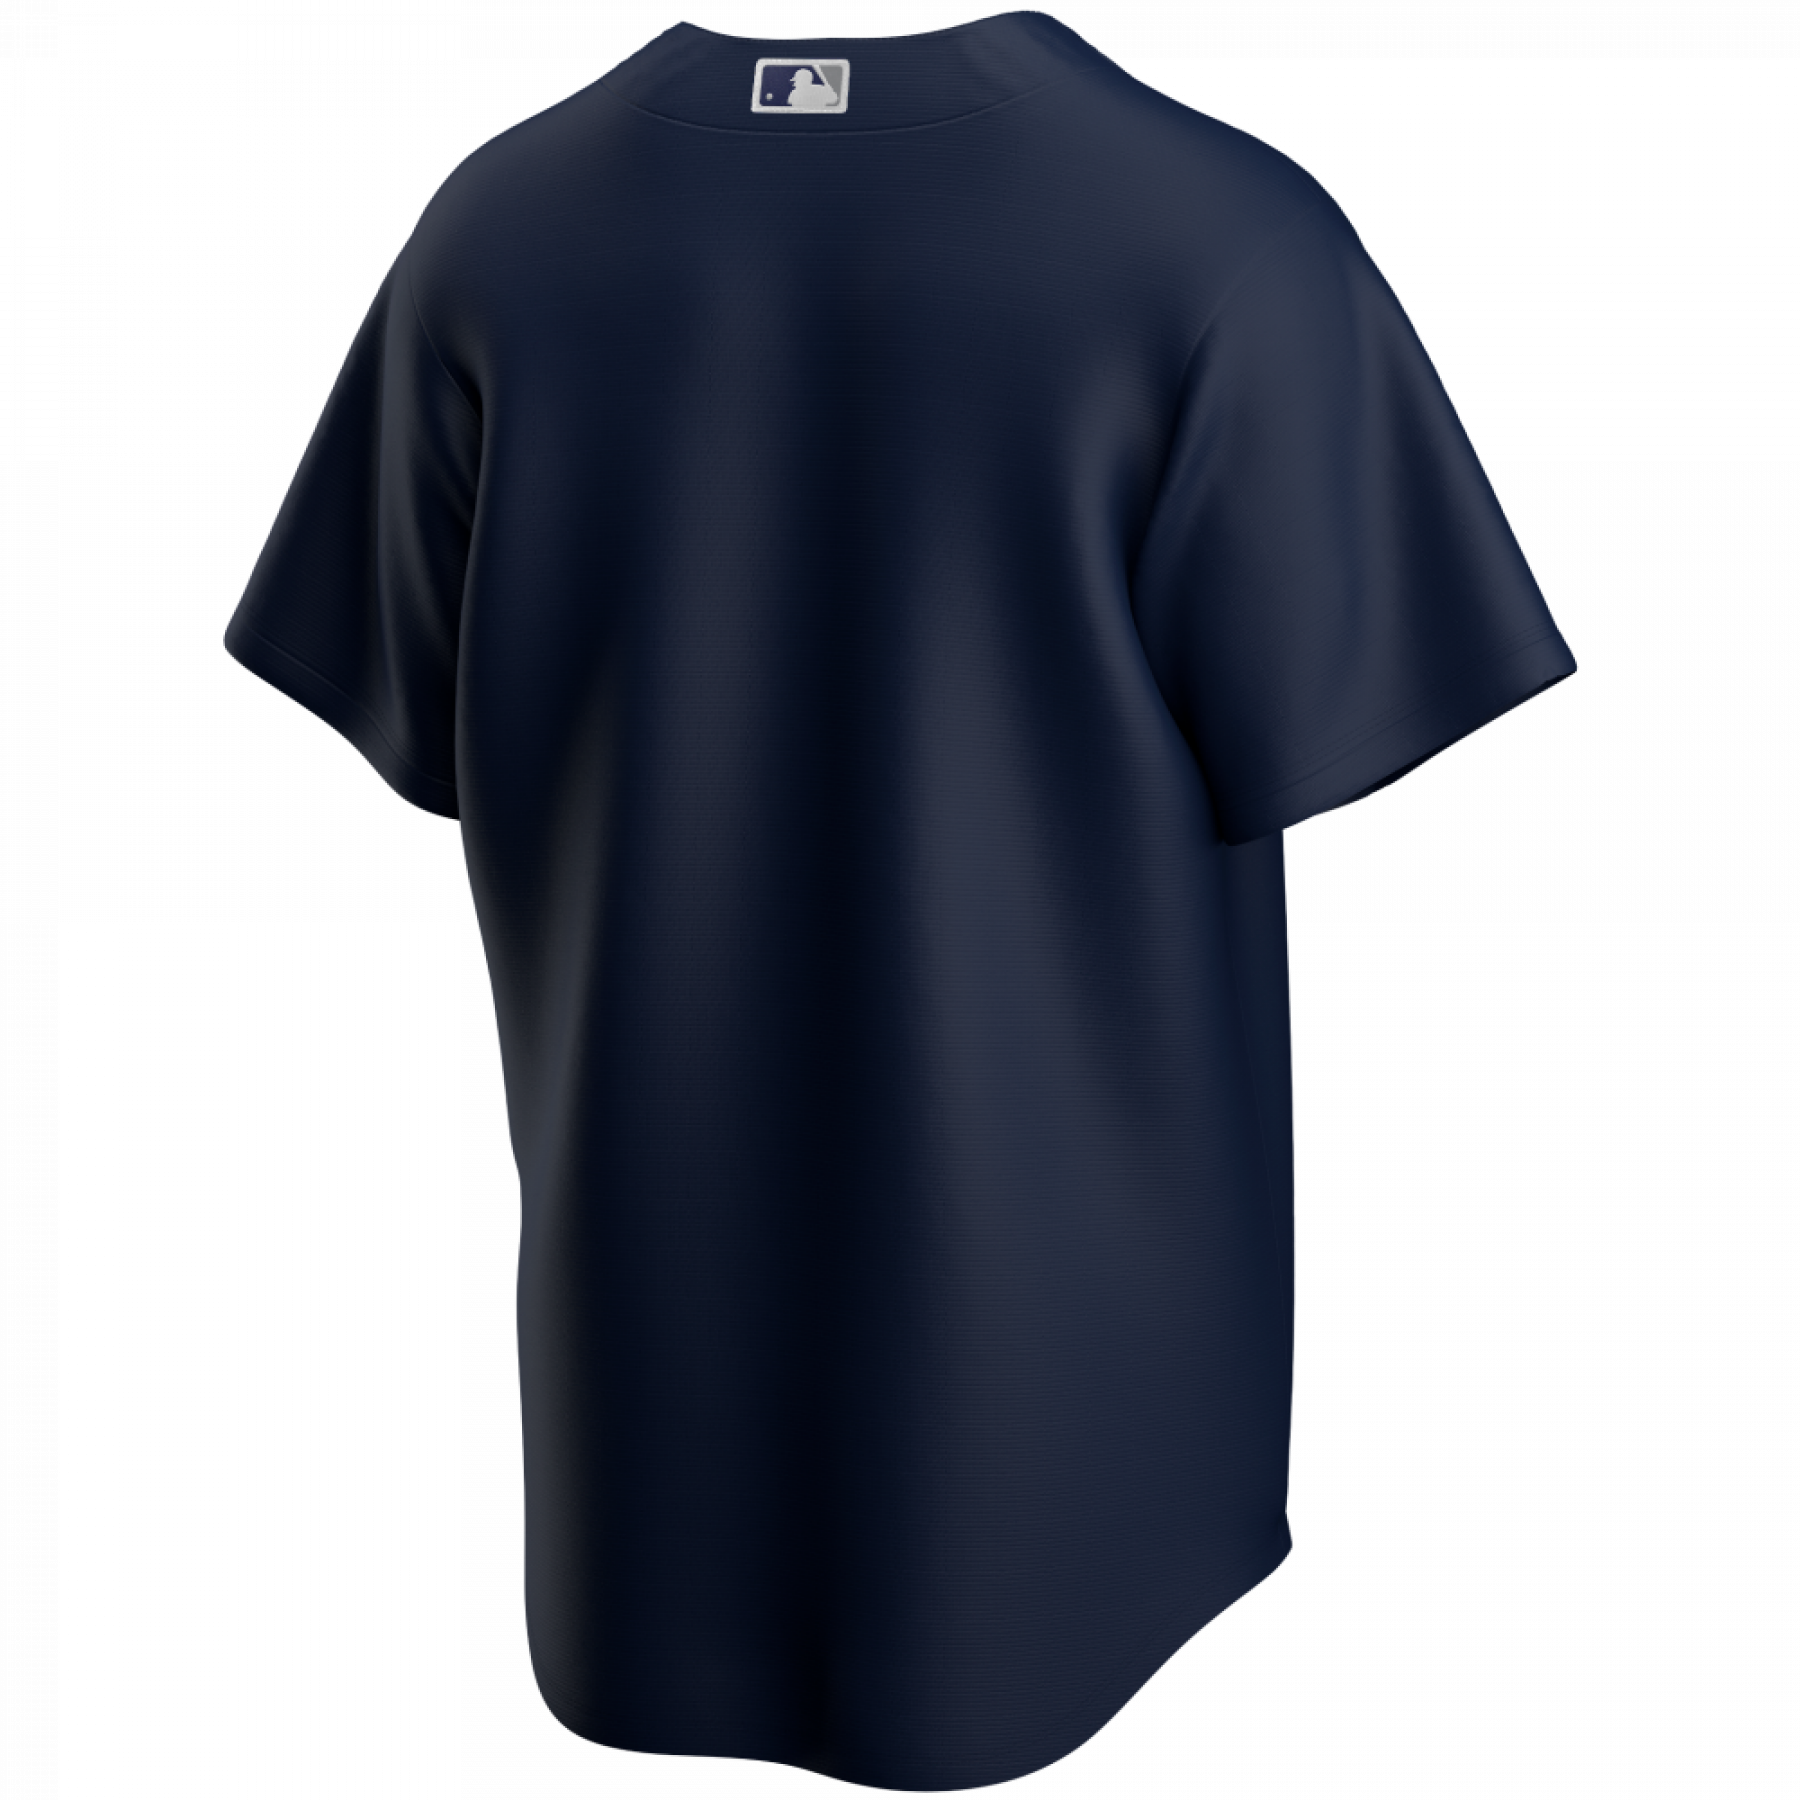 Camisola Official Replica New York Yankees away